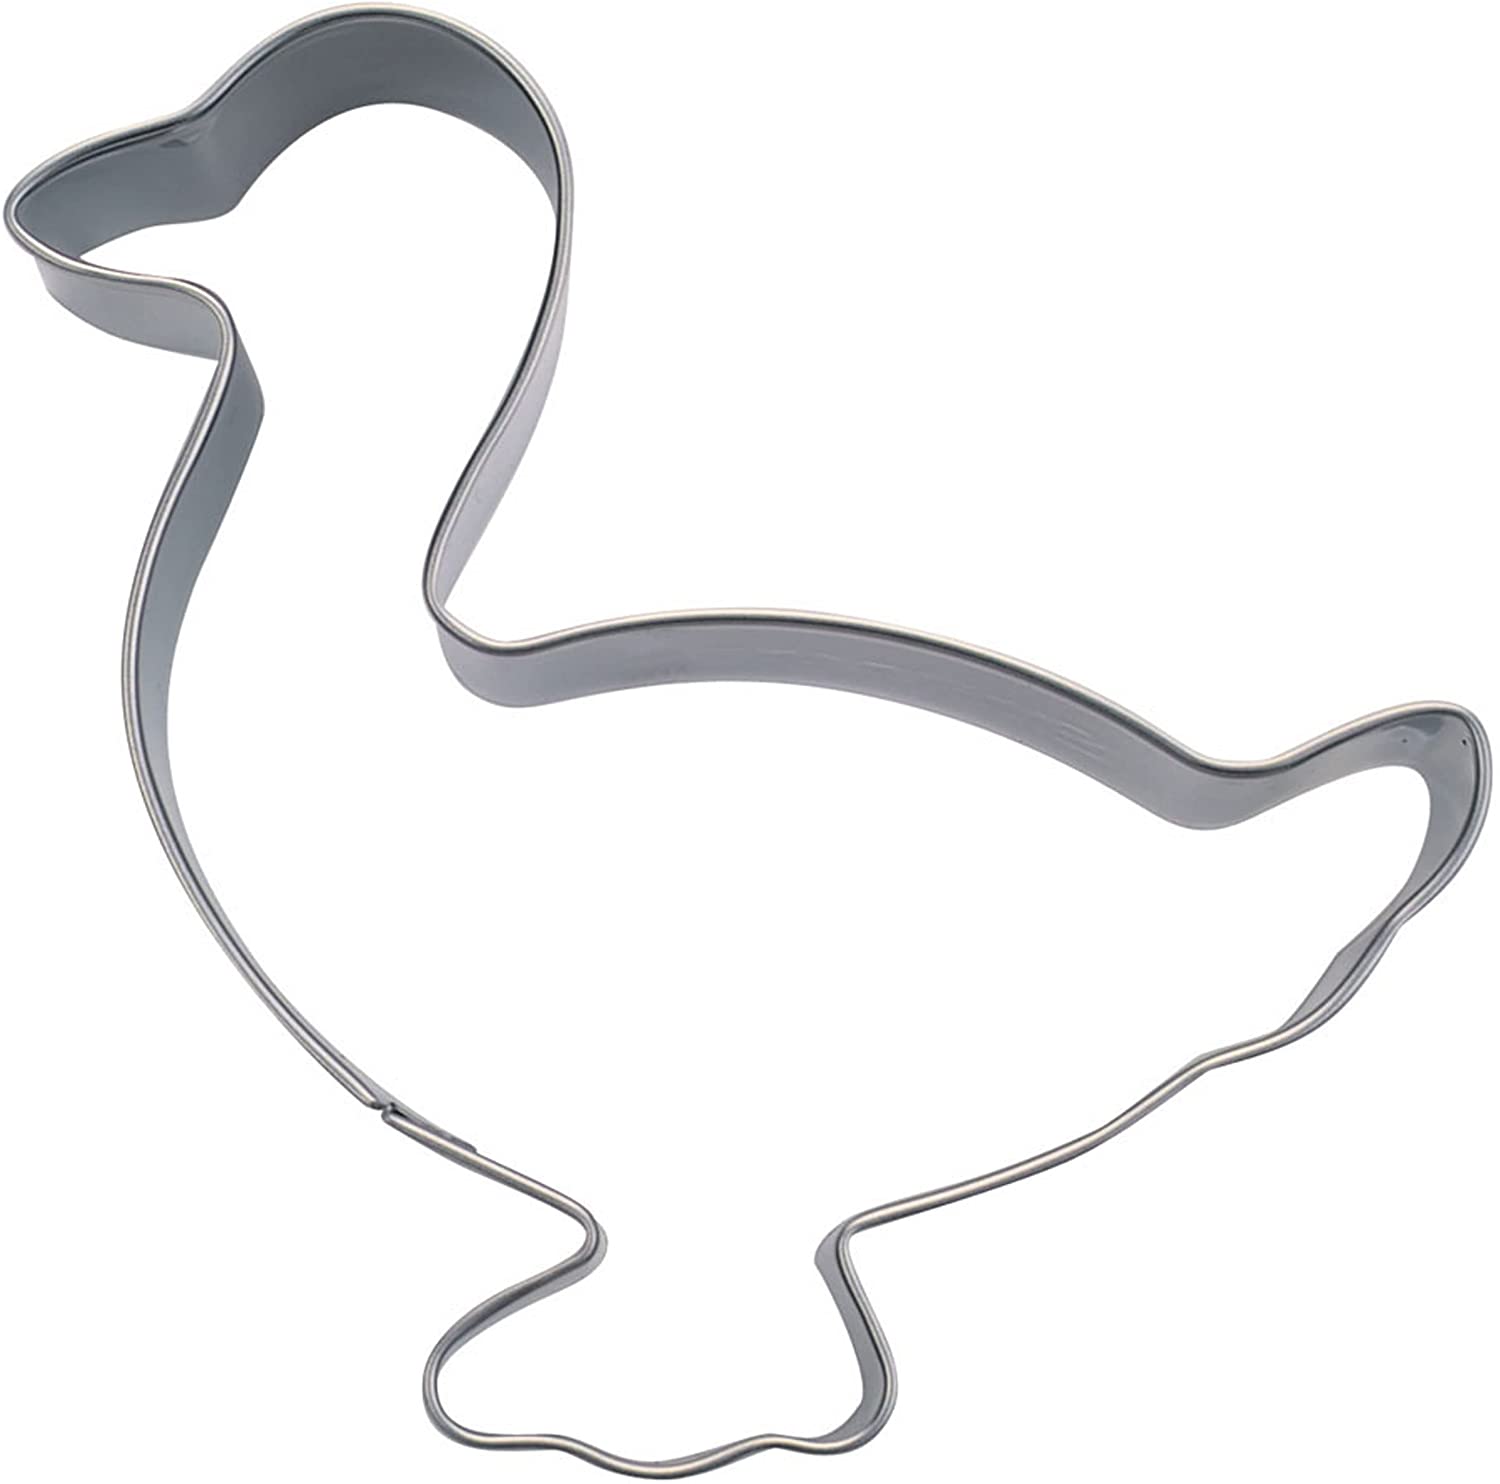 Staedter Goose Biscuit Cutter, Stainless Steel, Silver, 7.5 cm